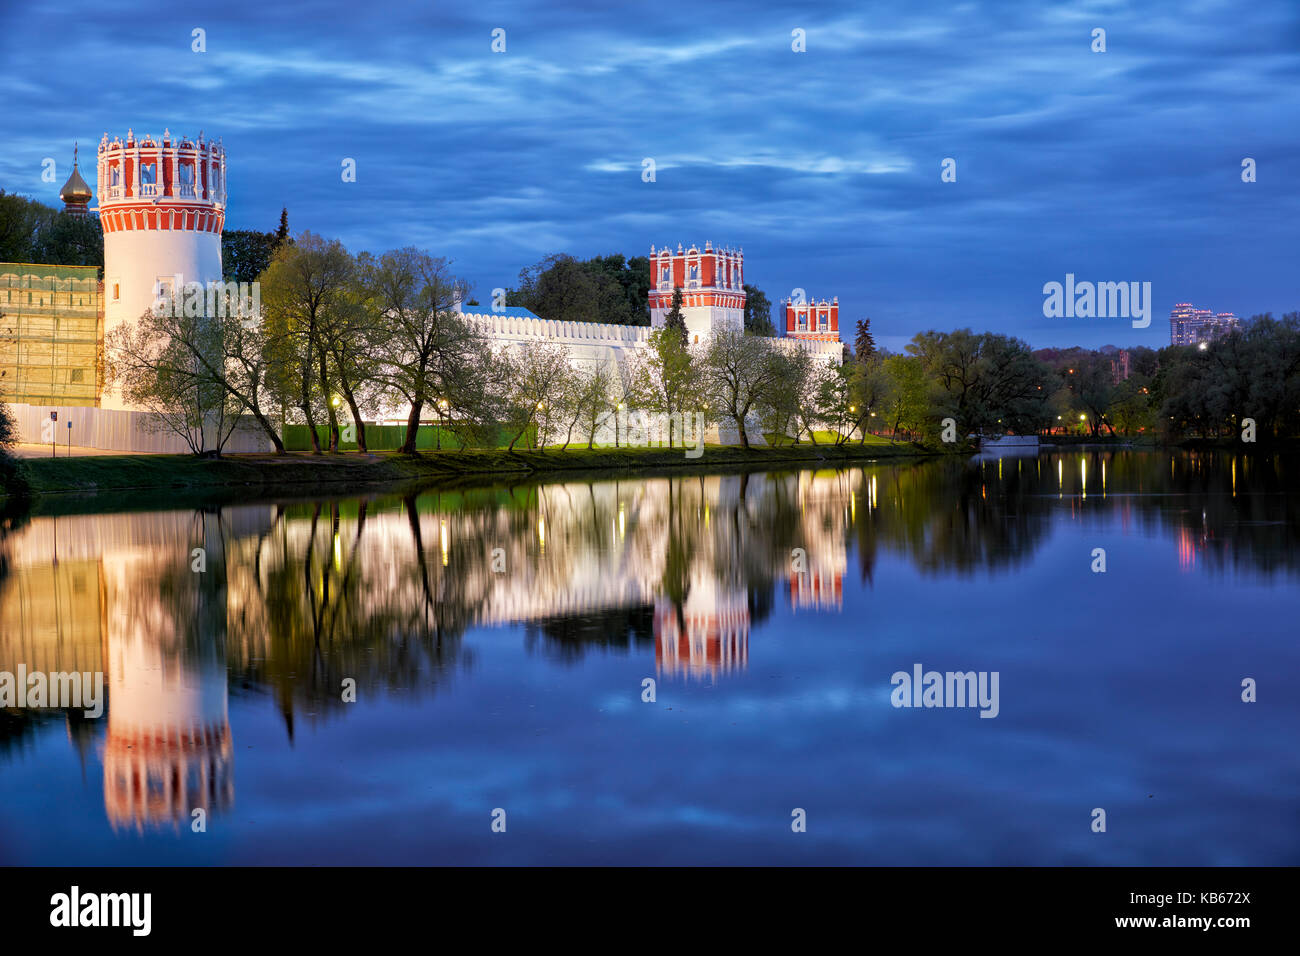 Outer wall of the Novodevichy Convent illuminated at dusk. Moscow, Russia. Stock Photo